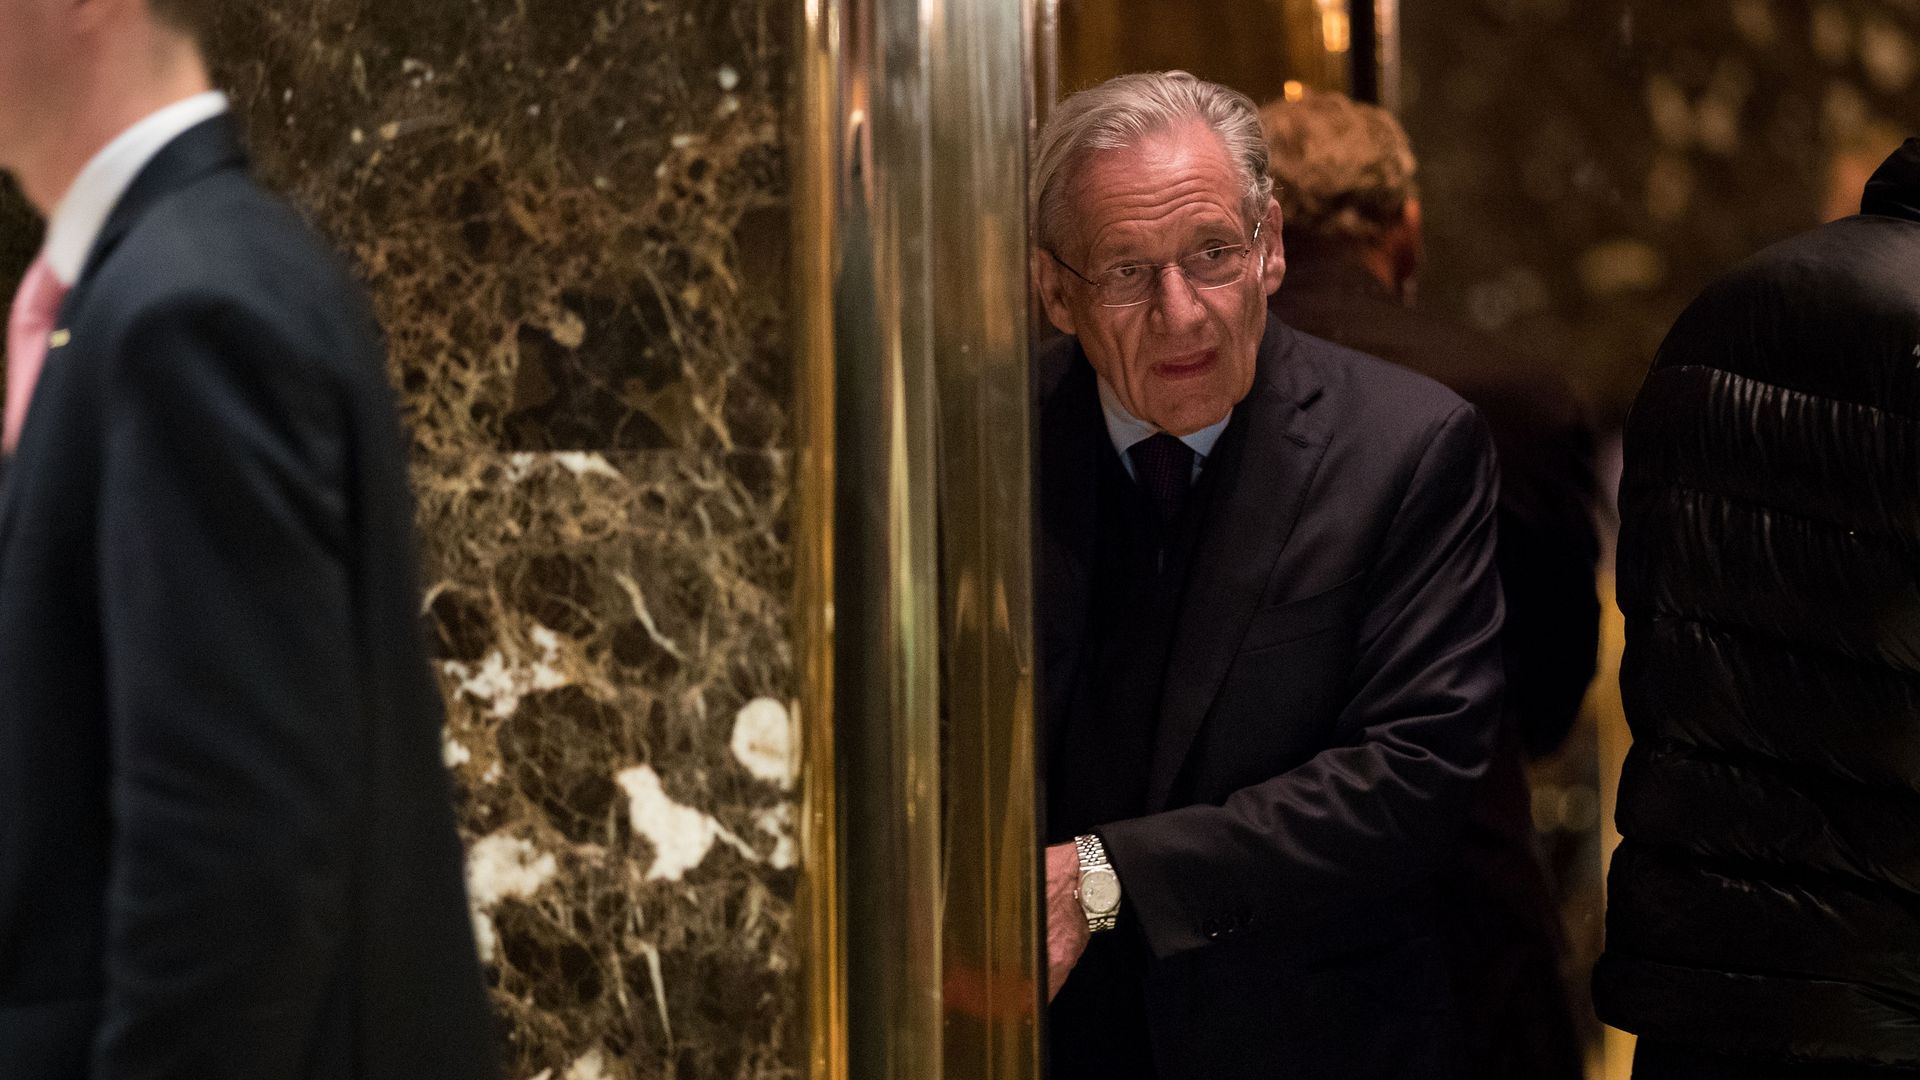 Journalist Bob Woodward at Trump Tower in January 2017. Photo: Drew Angerer/Getty Images